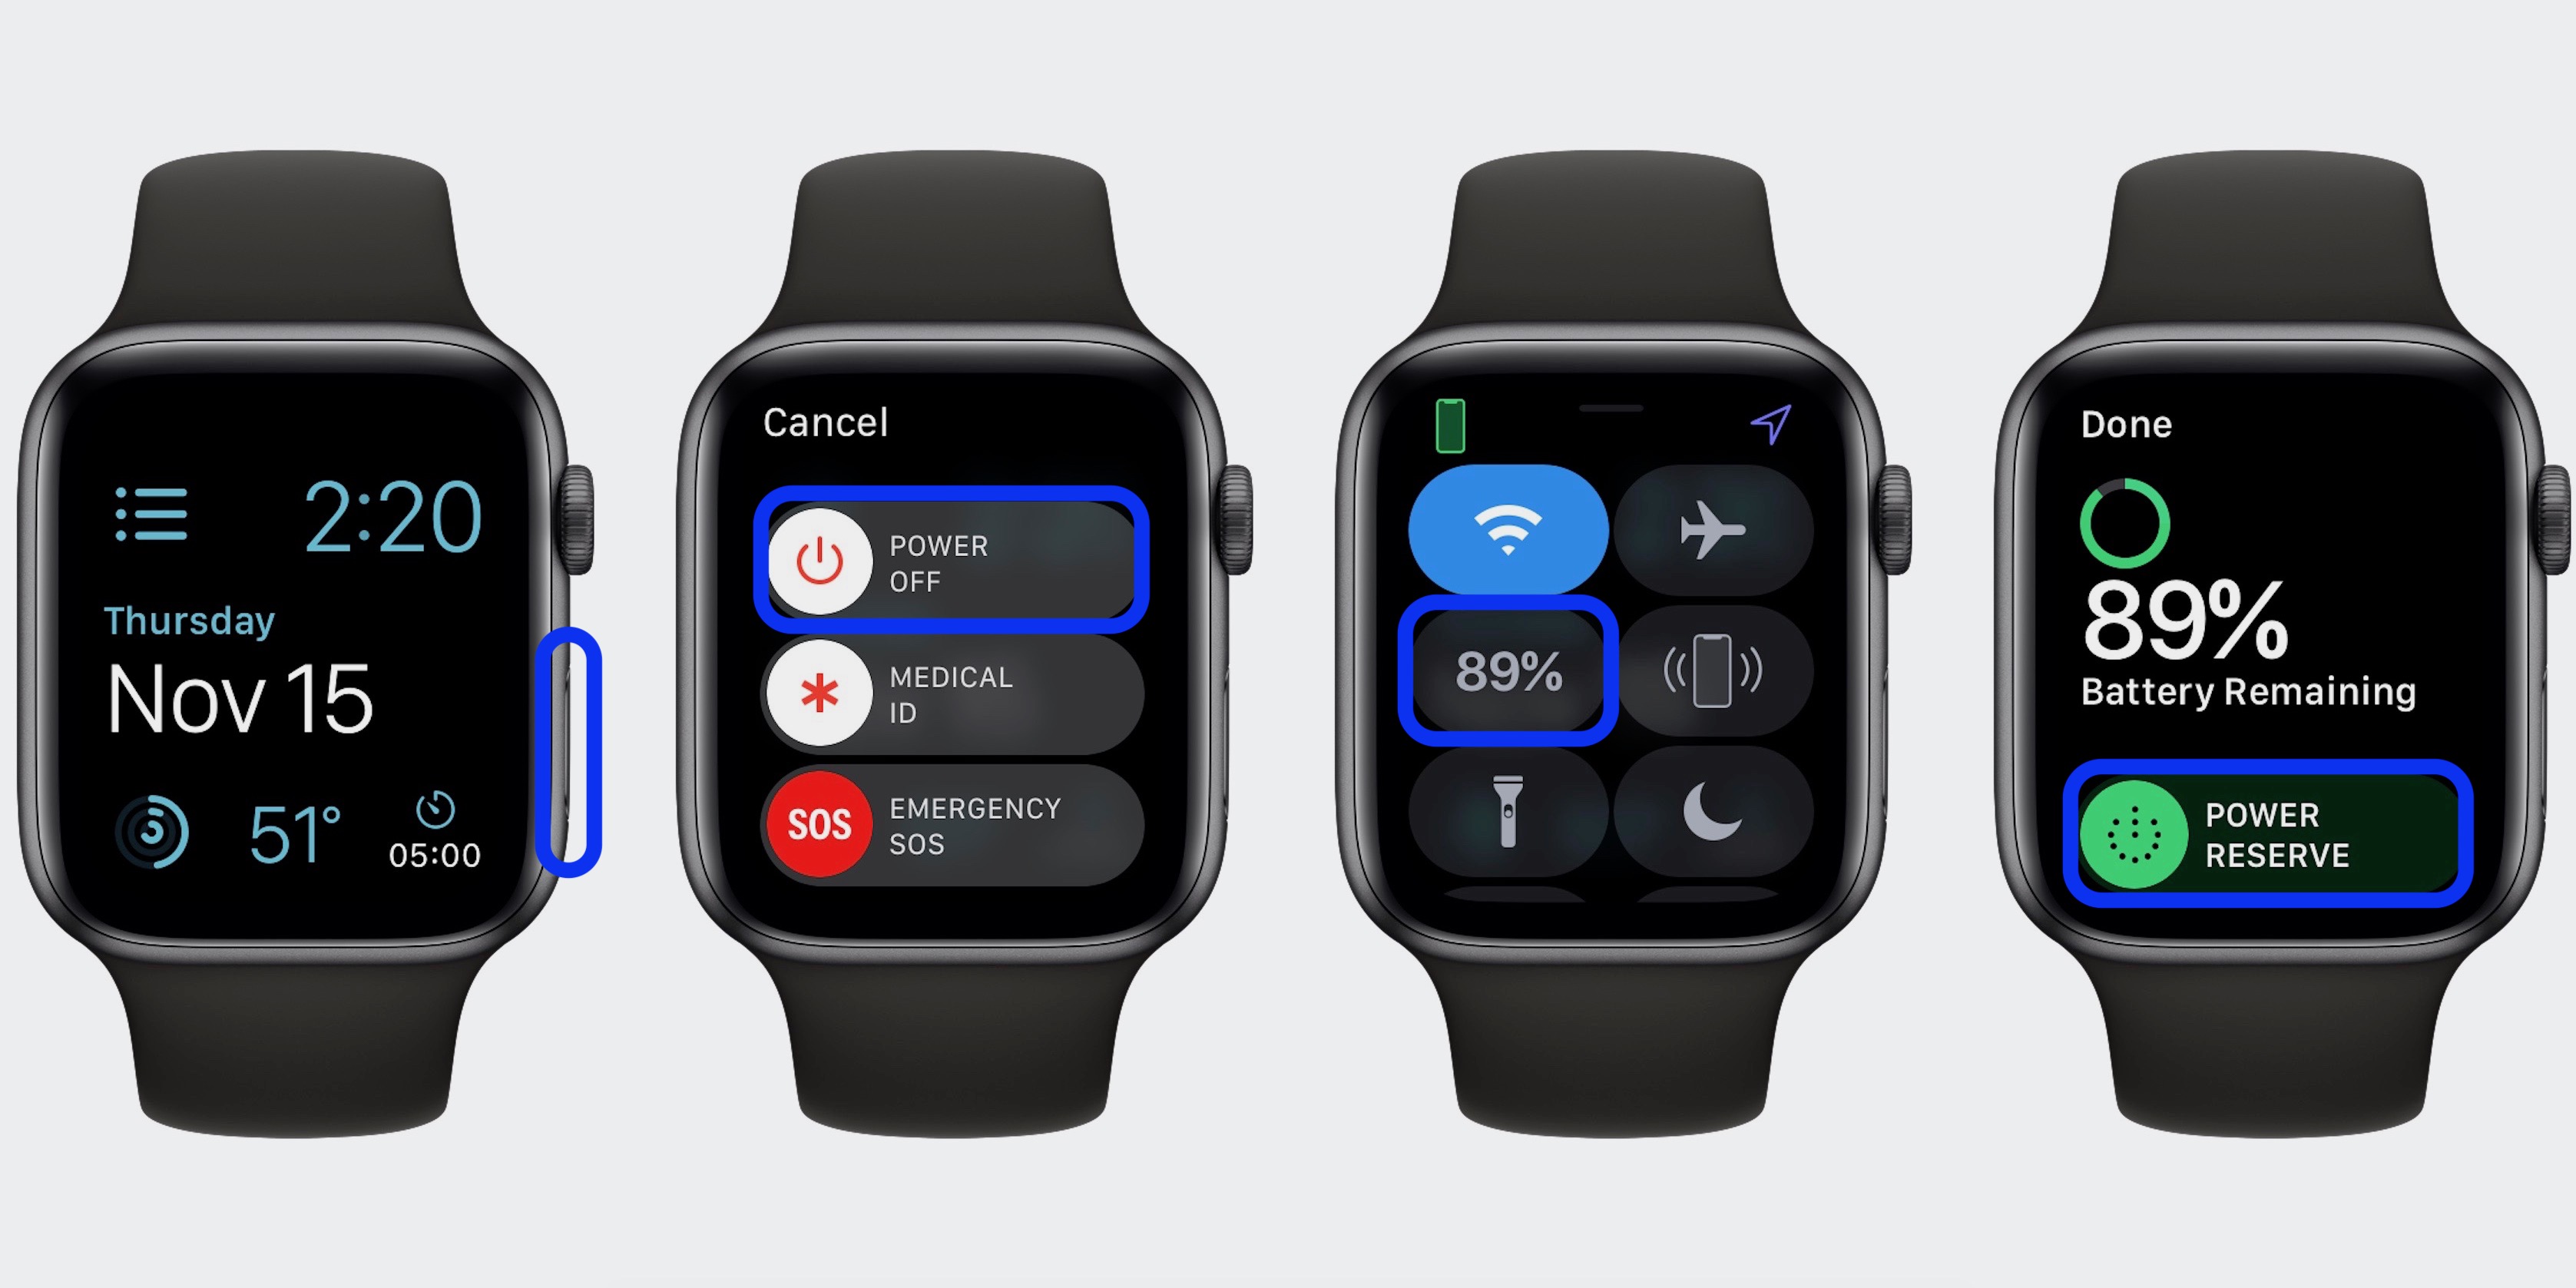 How to turn Apple Watch on and off 9to5Mac